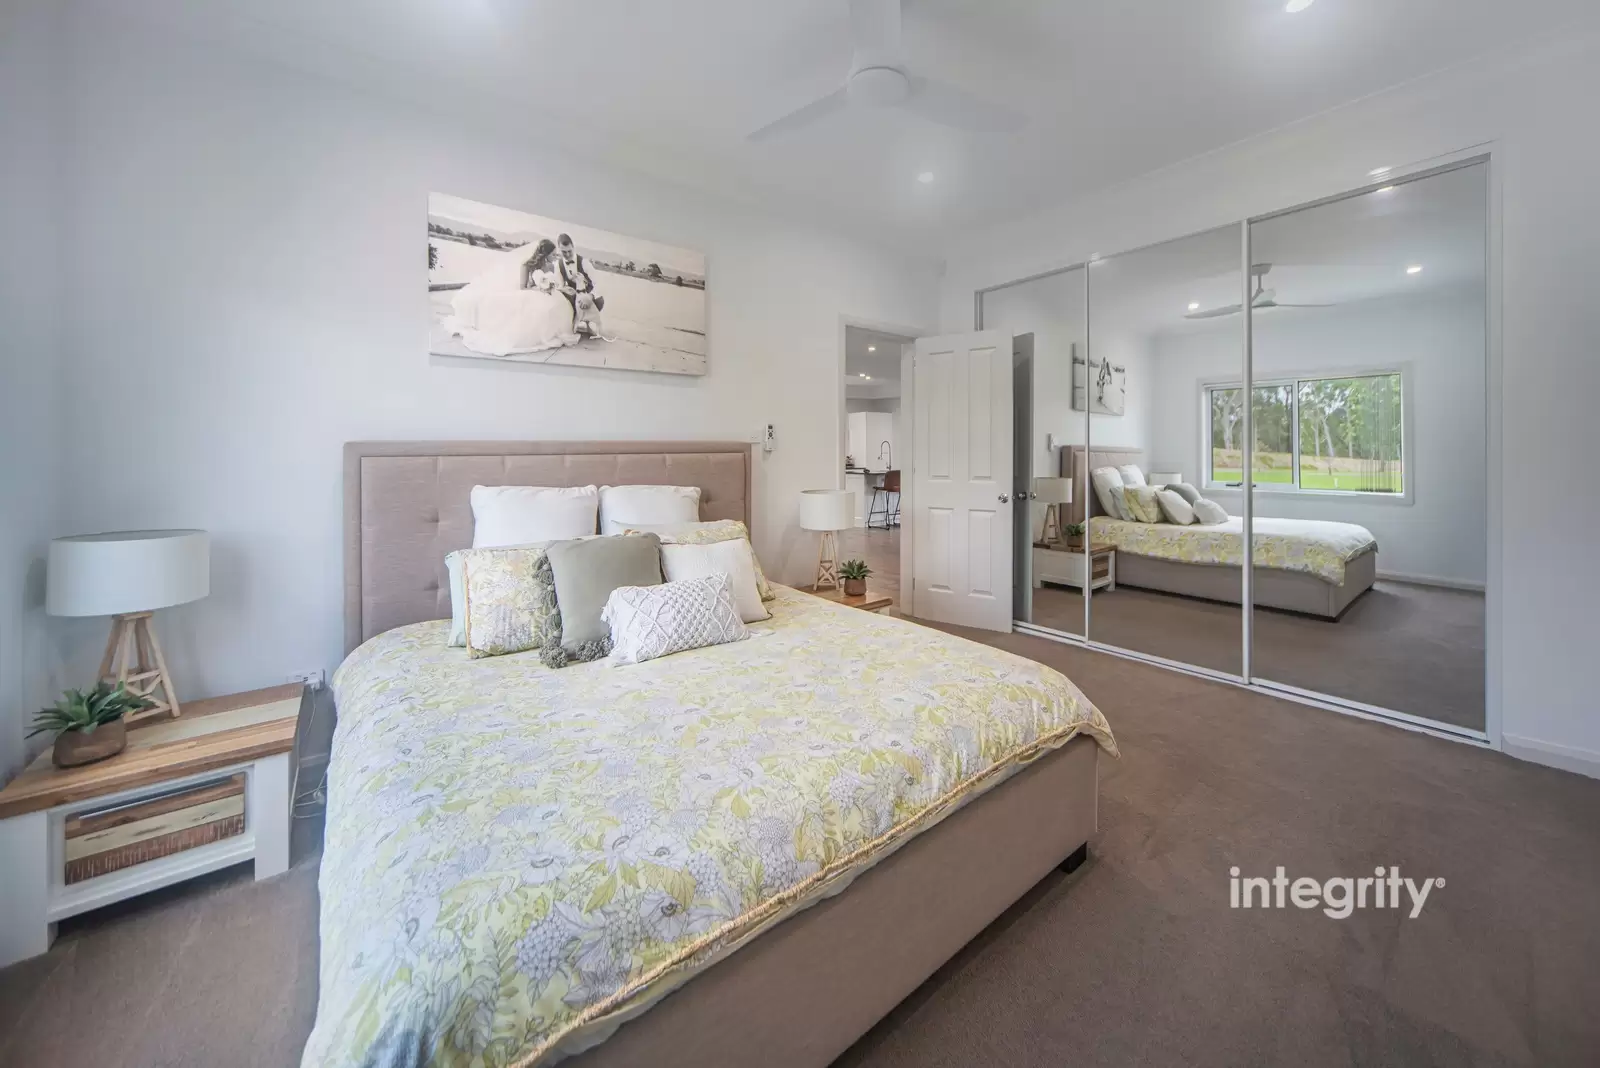 243 Turpentine Road, Tomerong For Sale by Integrity Real Estate - image 9